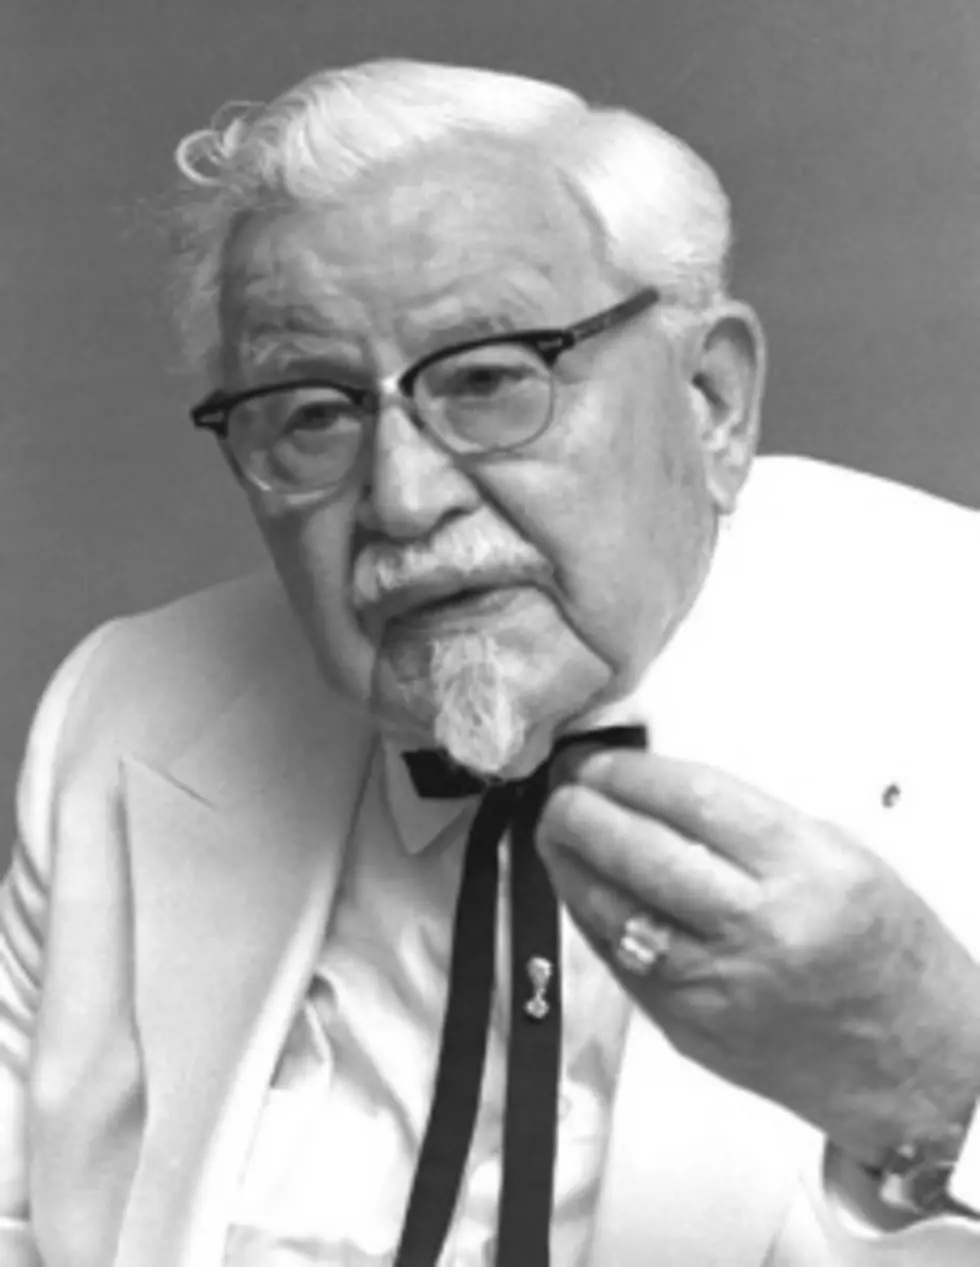 The Amazing Story Of Colonel Sanders You Never Knew